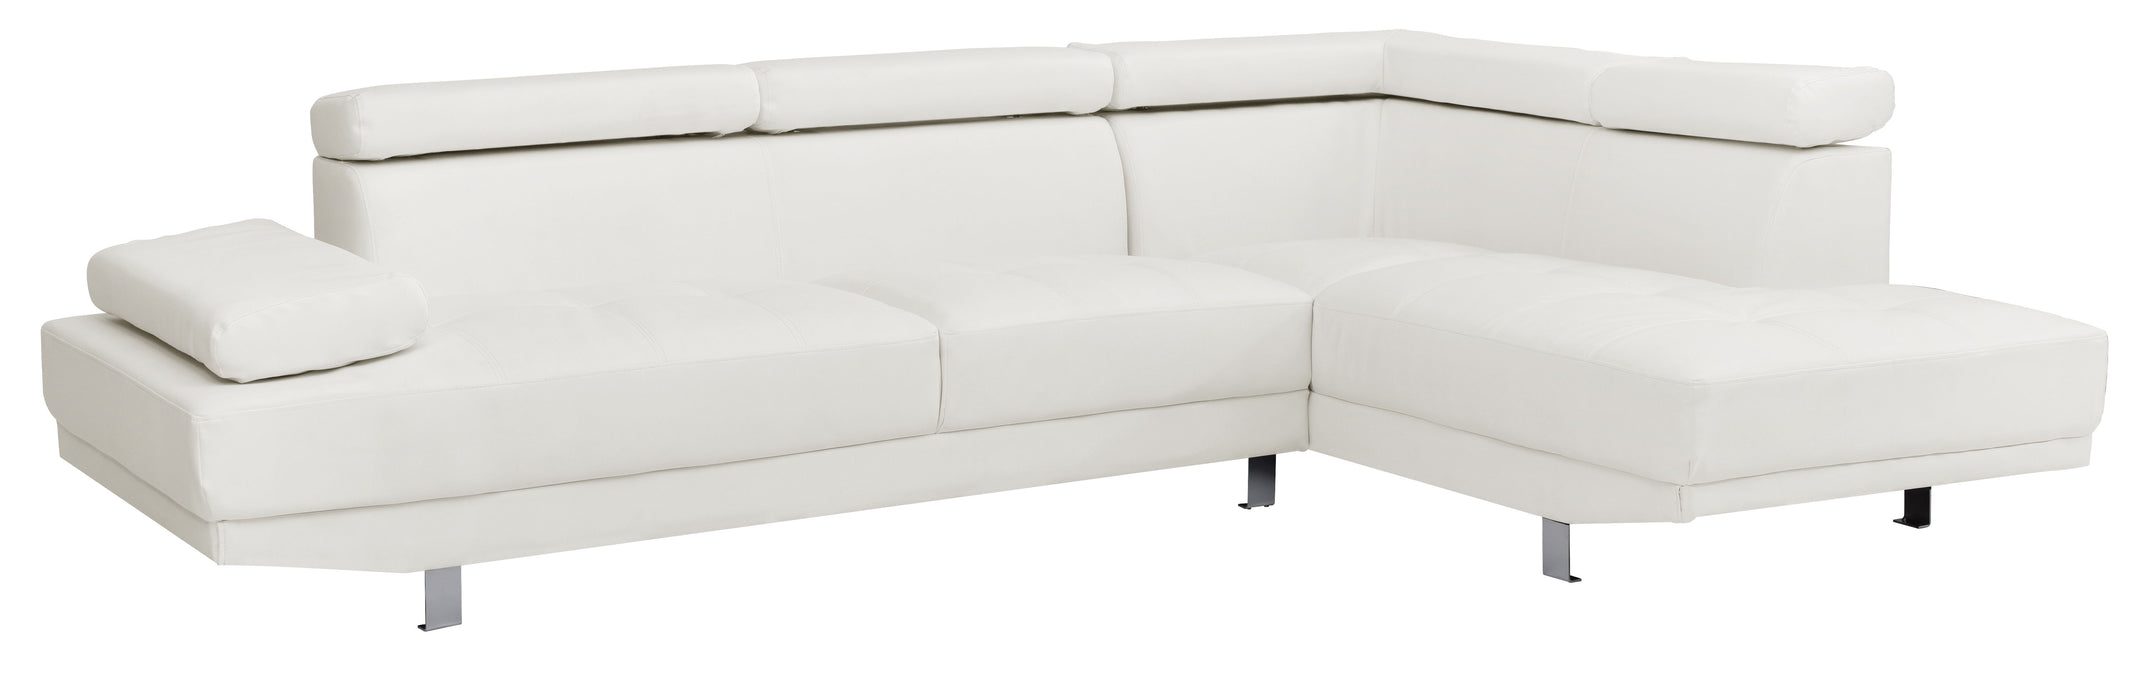 Riveredge - Sectional (2 Boxes)